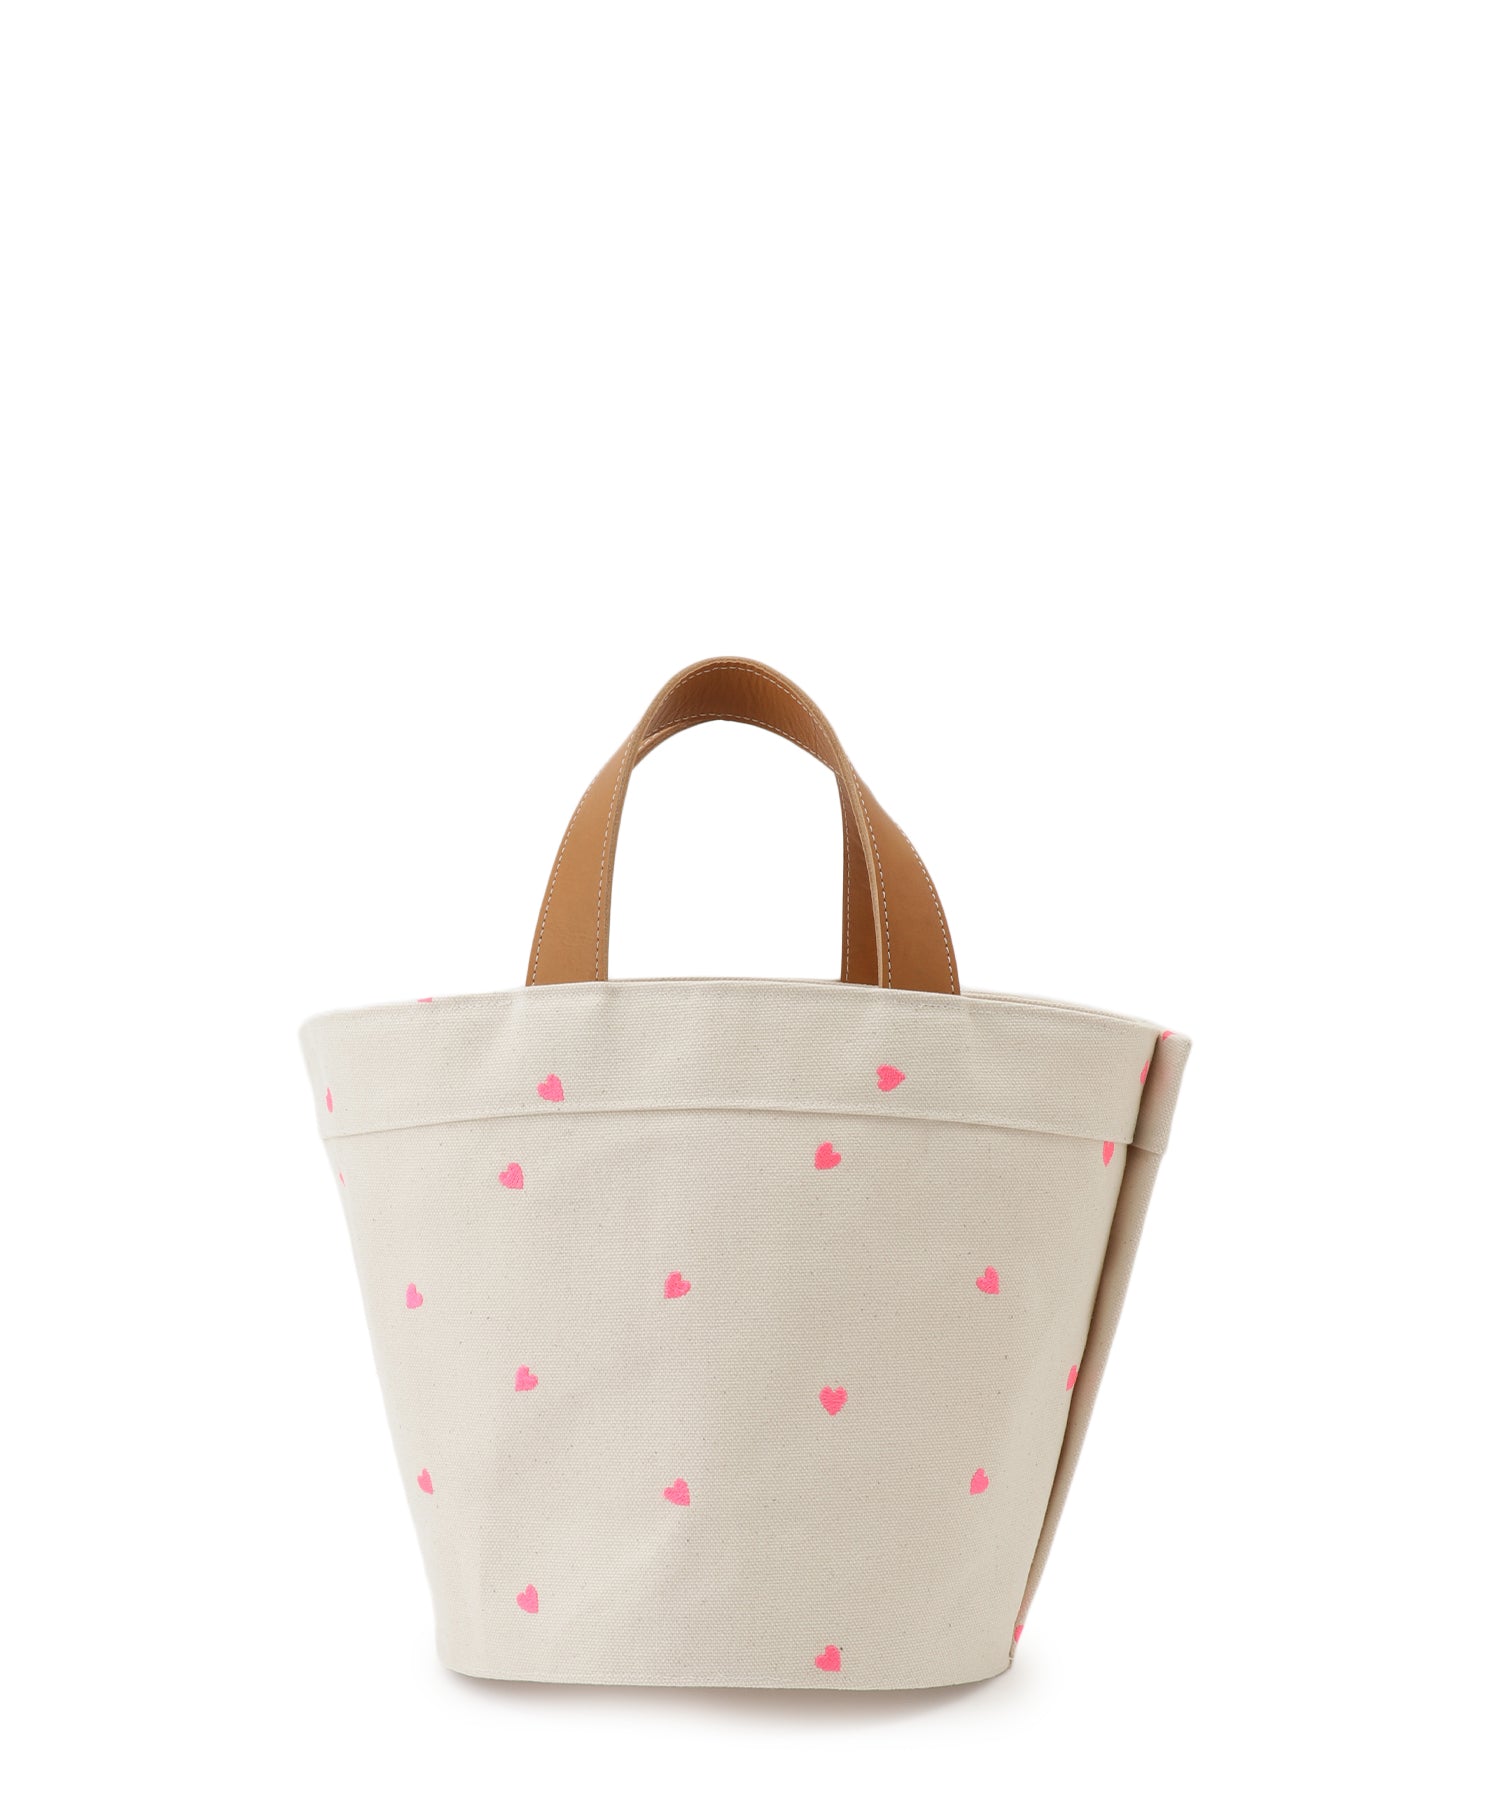 WEB限定] Canvas tote S (heart embroidery)— LUDLOW STORE